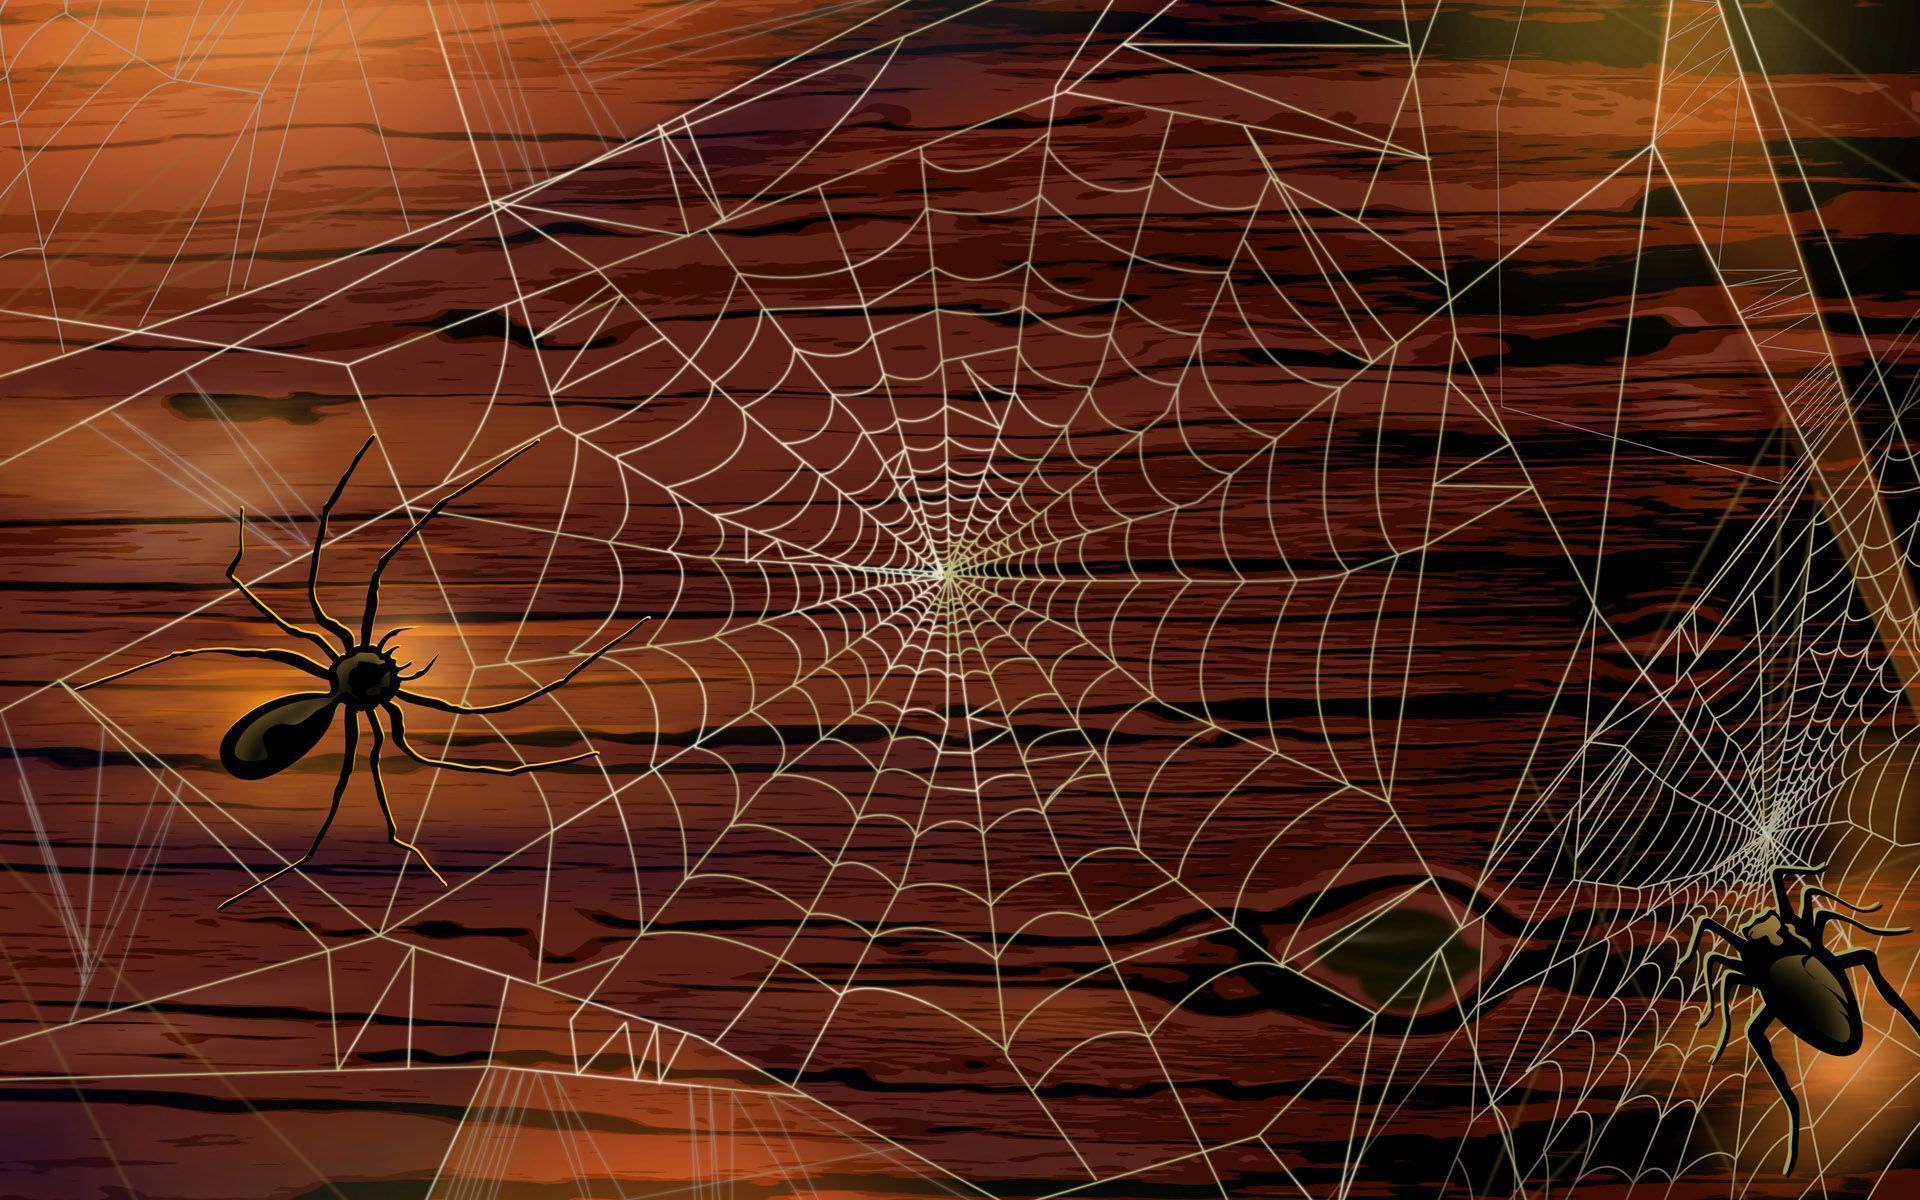 Scary Halloween 2012 HD Wallpapers | Pumpkins, Witches, Spider Web ...